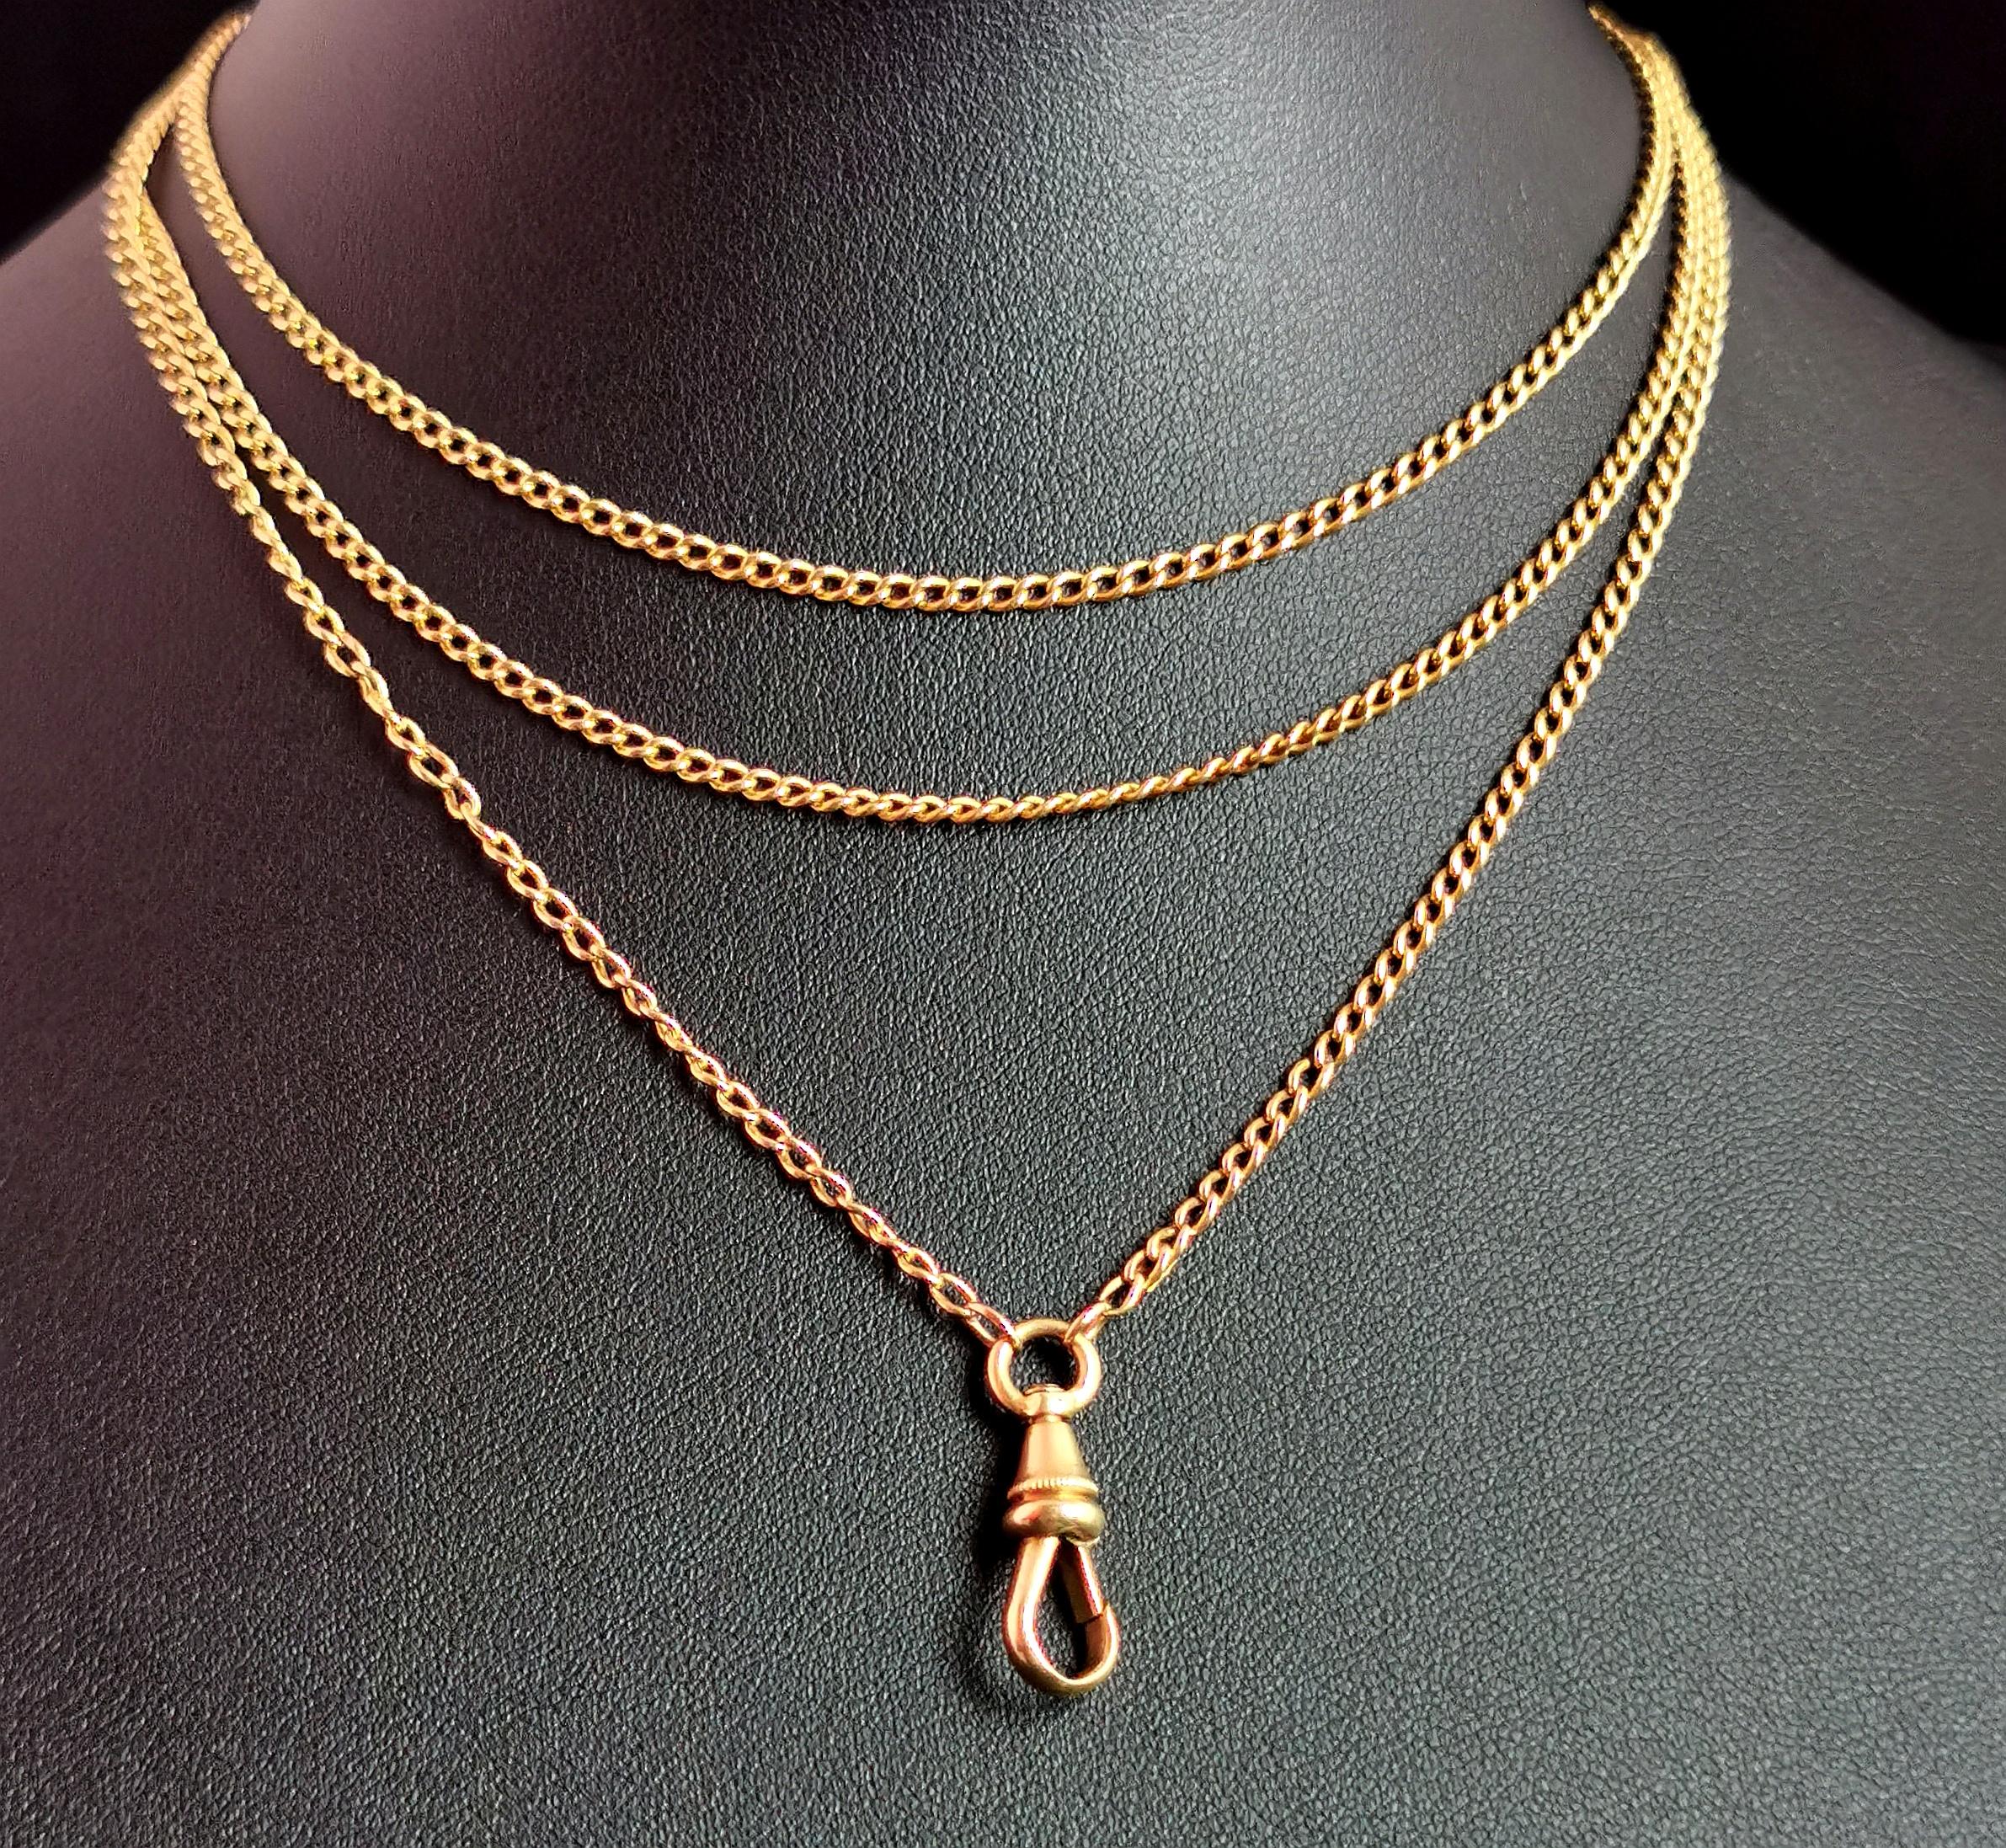 Antique 18k Yellow Gold Longuard Chain Necklace, Victorian 8